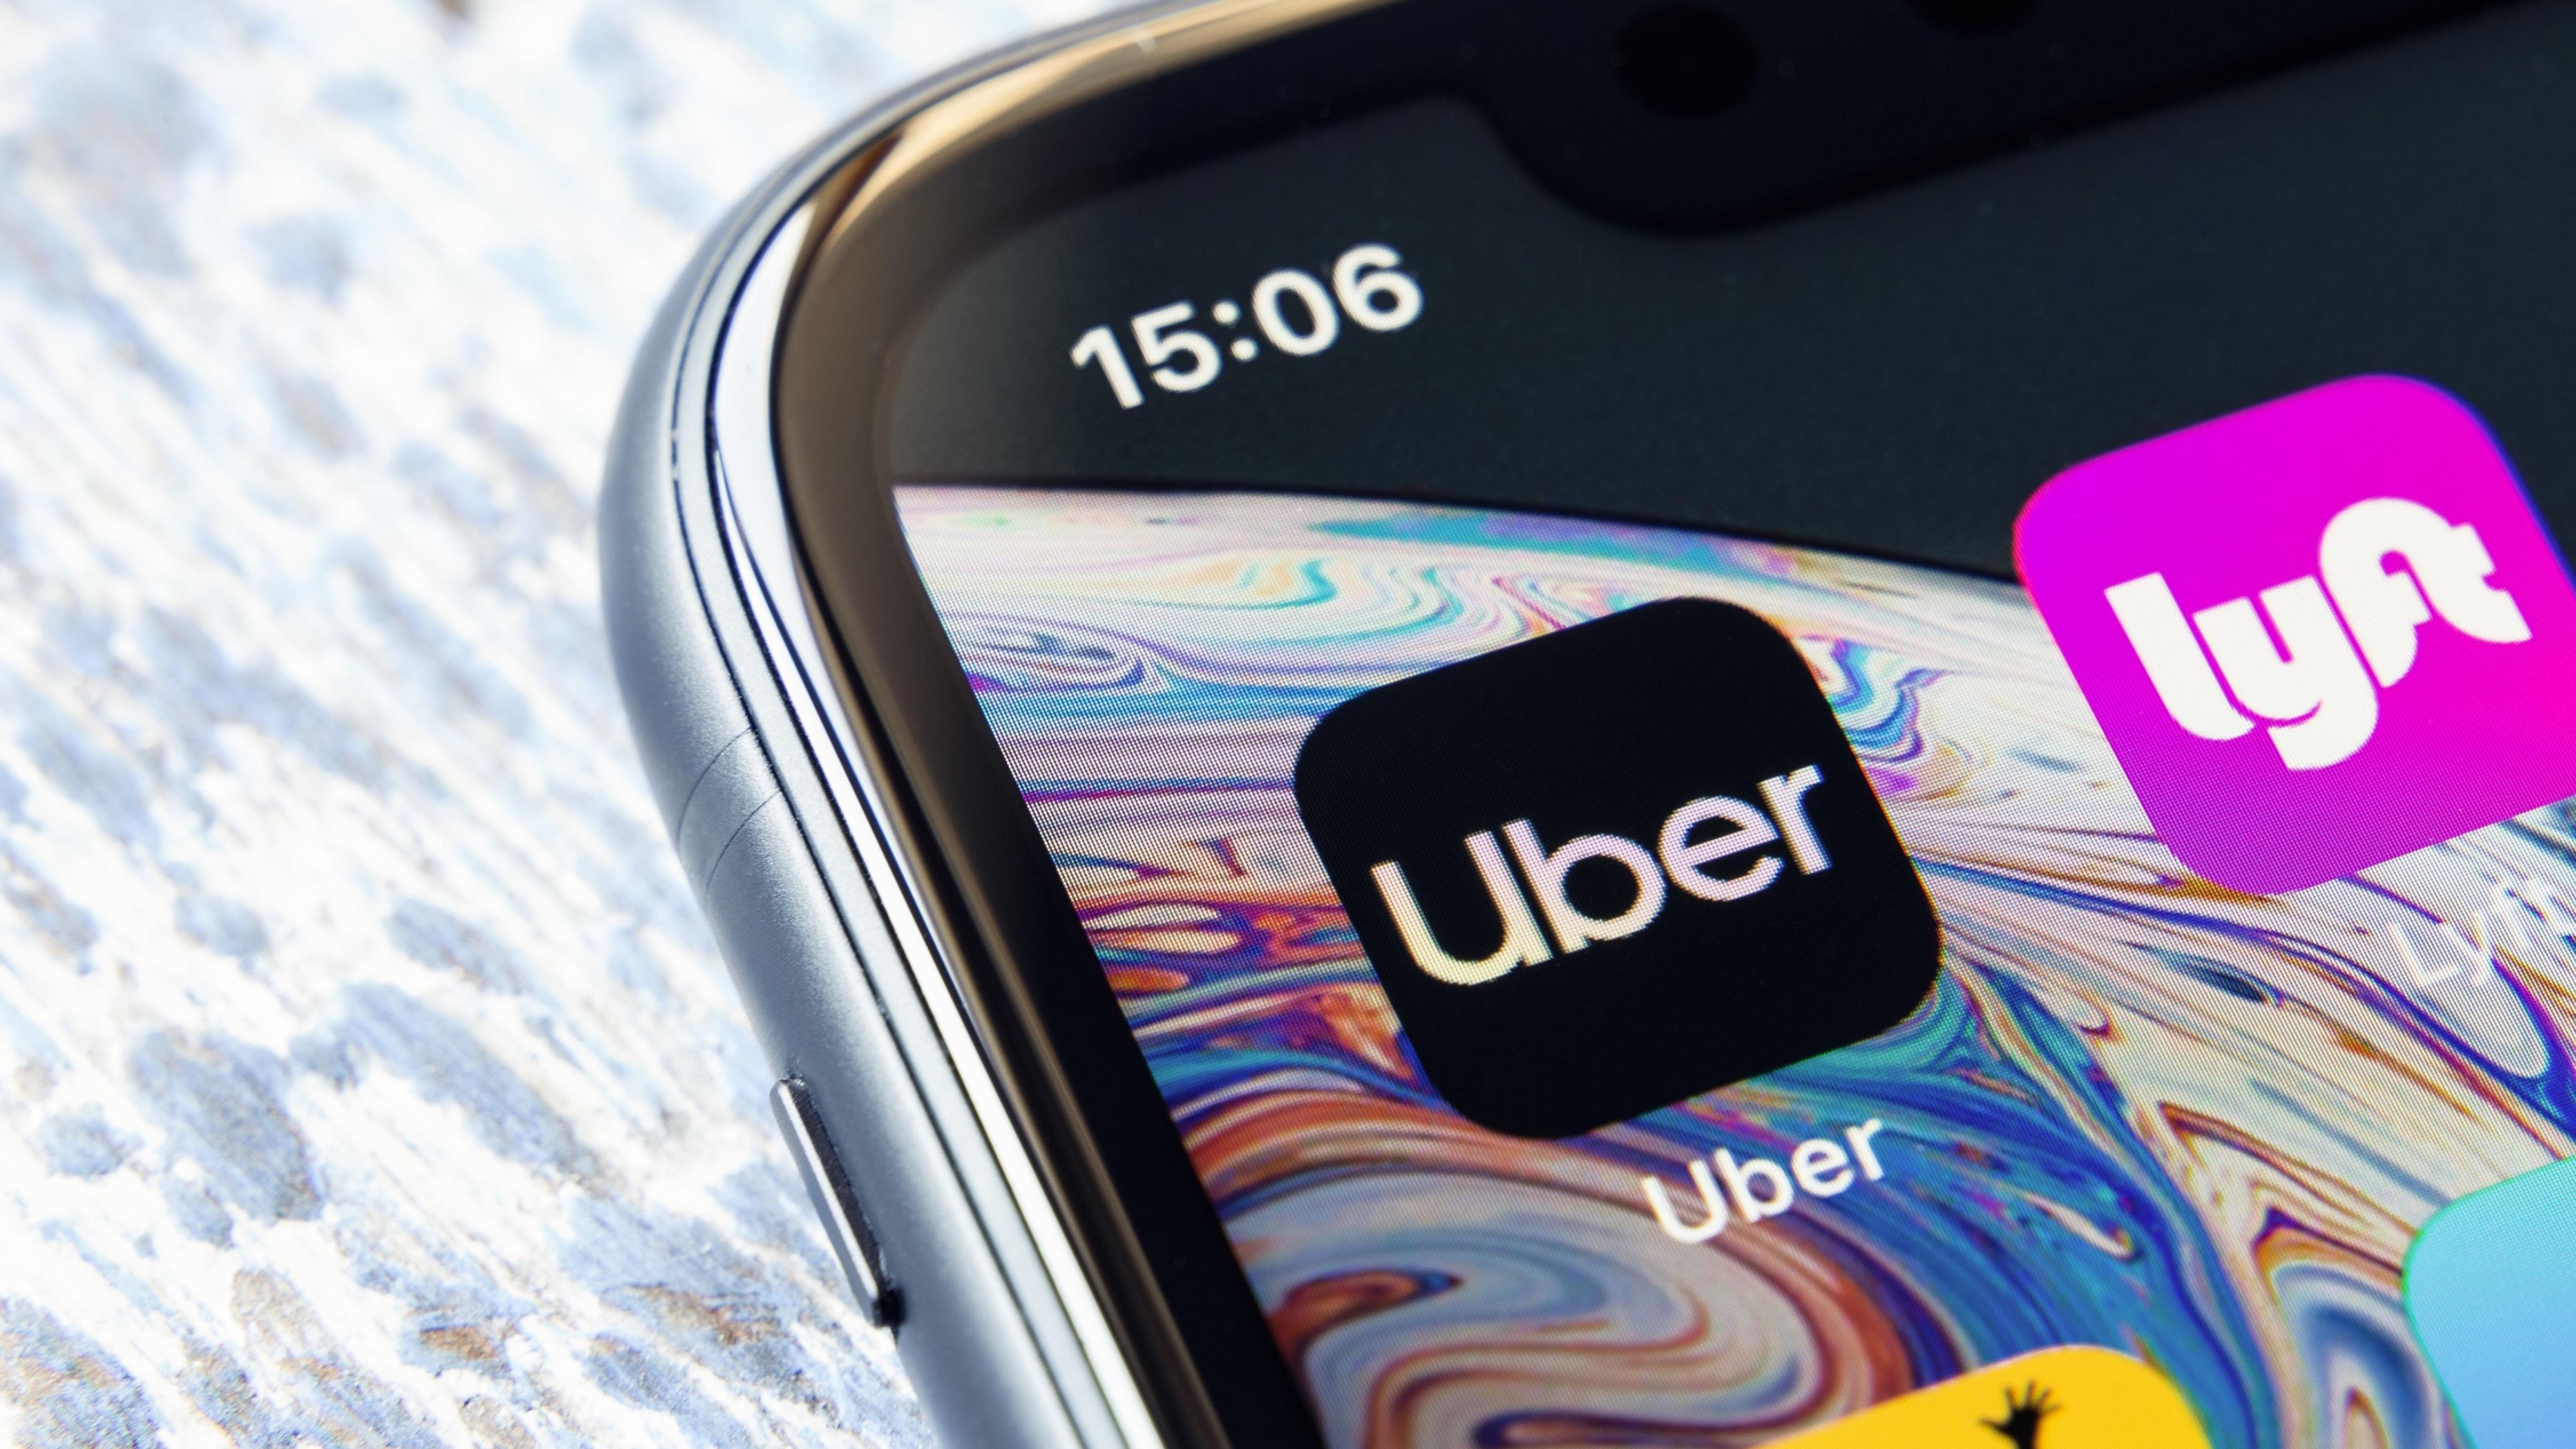 Uber drivers are employees and are subject to the Taxi Transport Collective Agreement